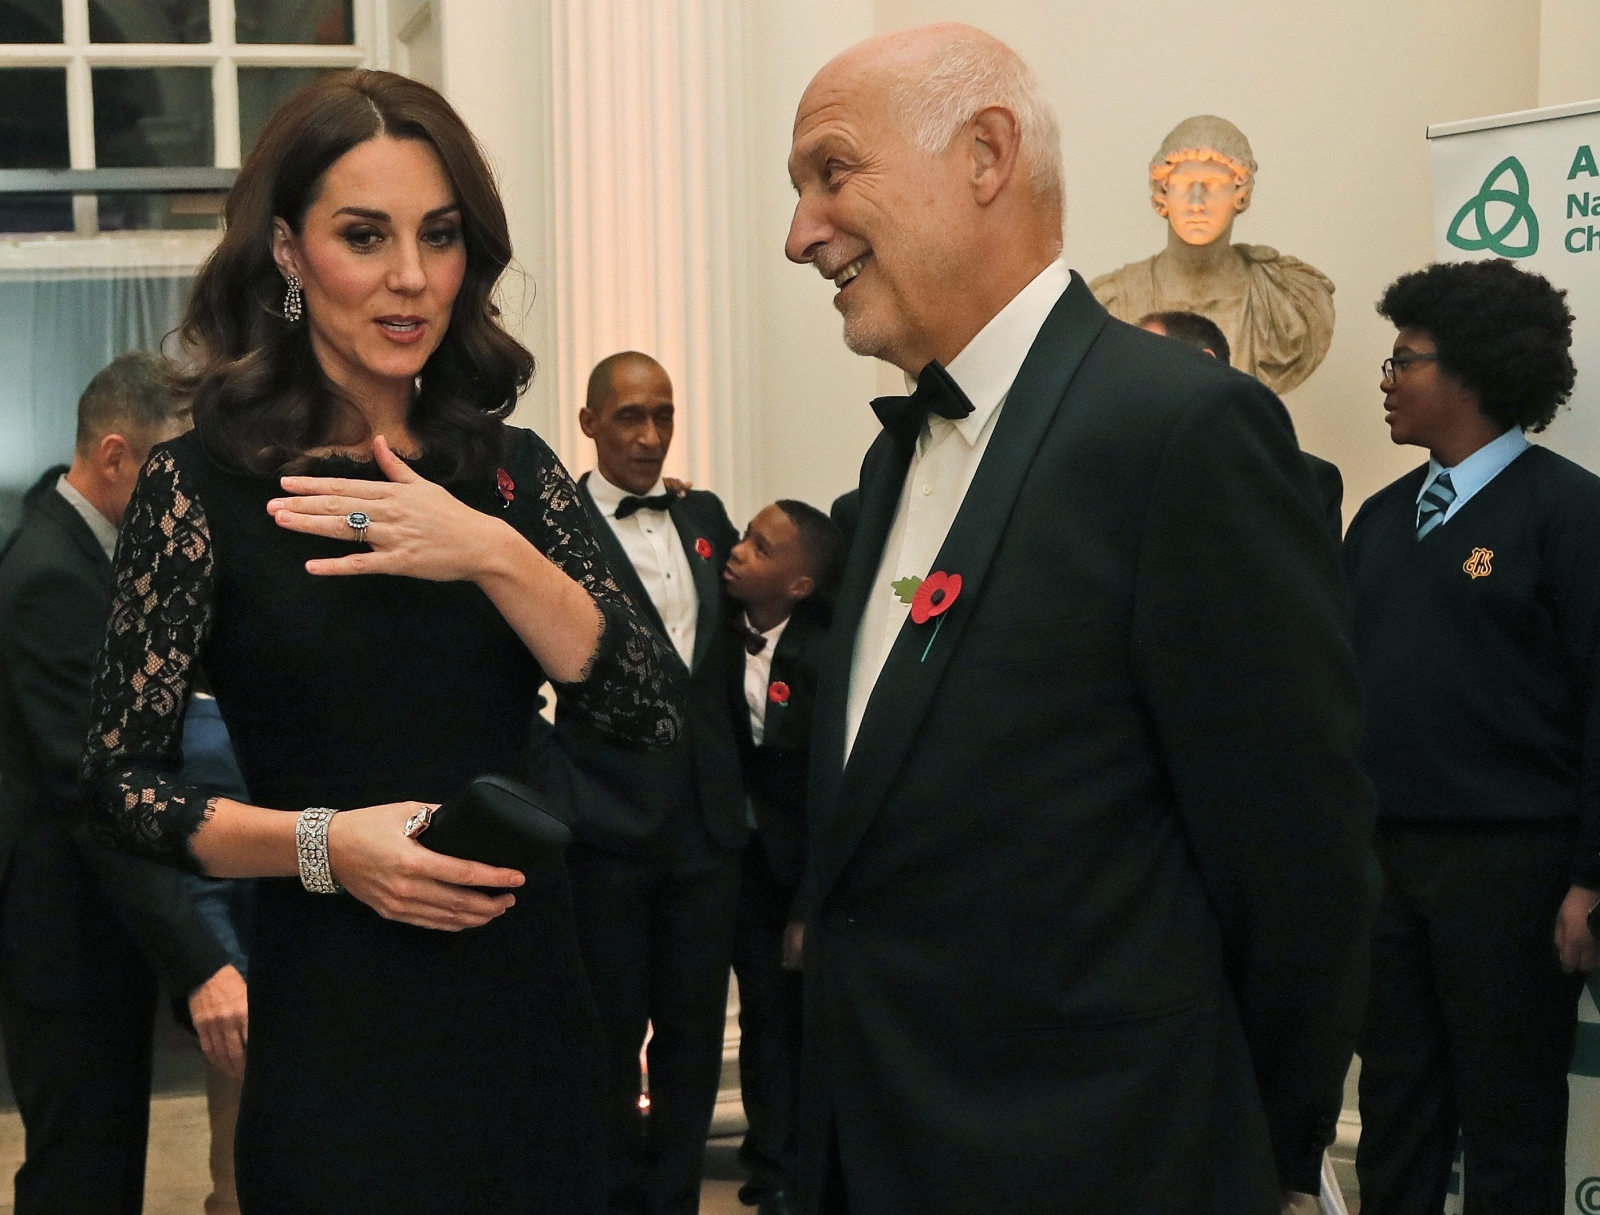 Image result for Duchess of Cambridge shows off baby bump at gala dinner